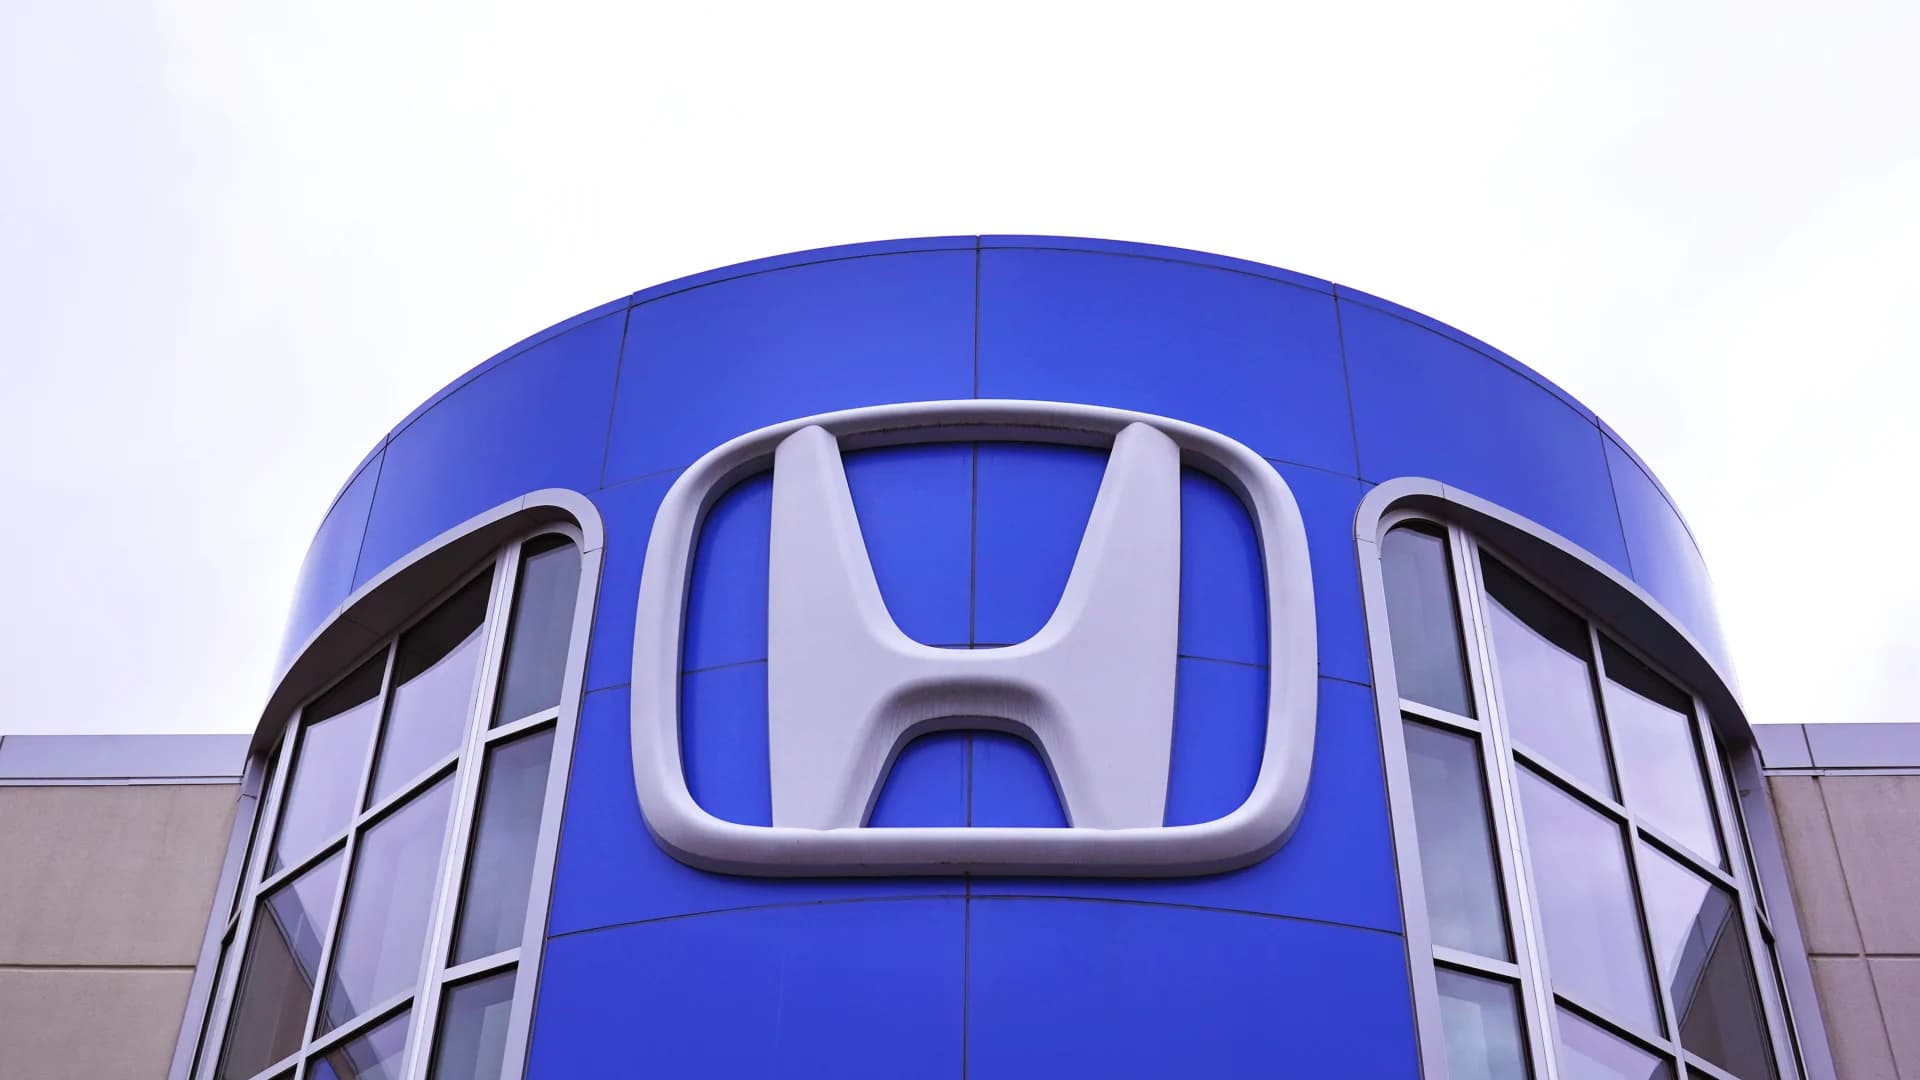 Honda recalls more than 330,000 vehicles due to mirror issue